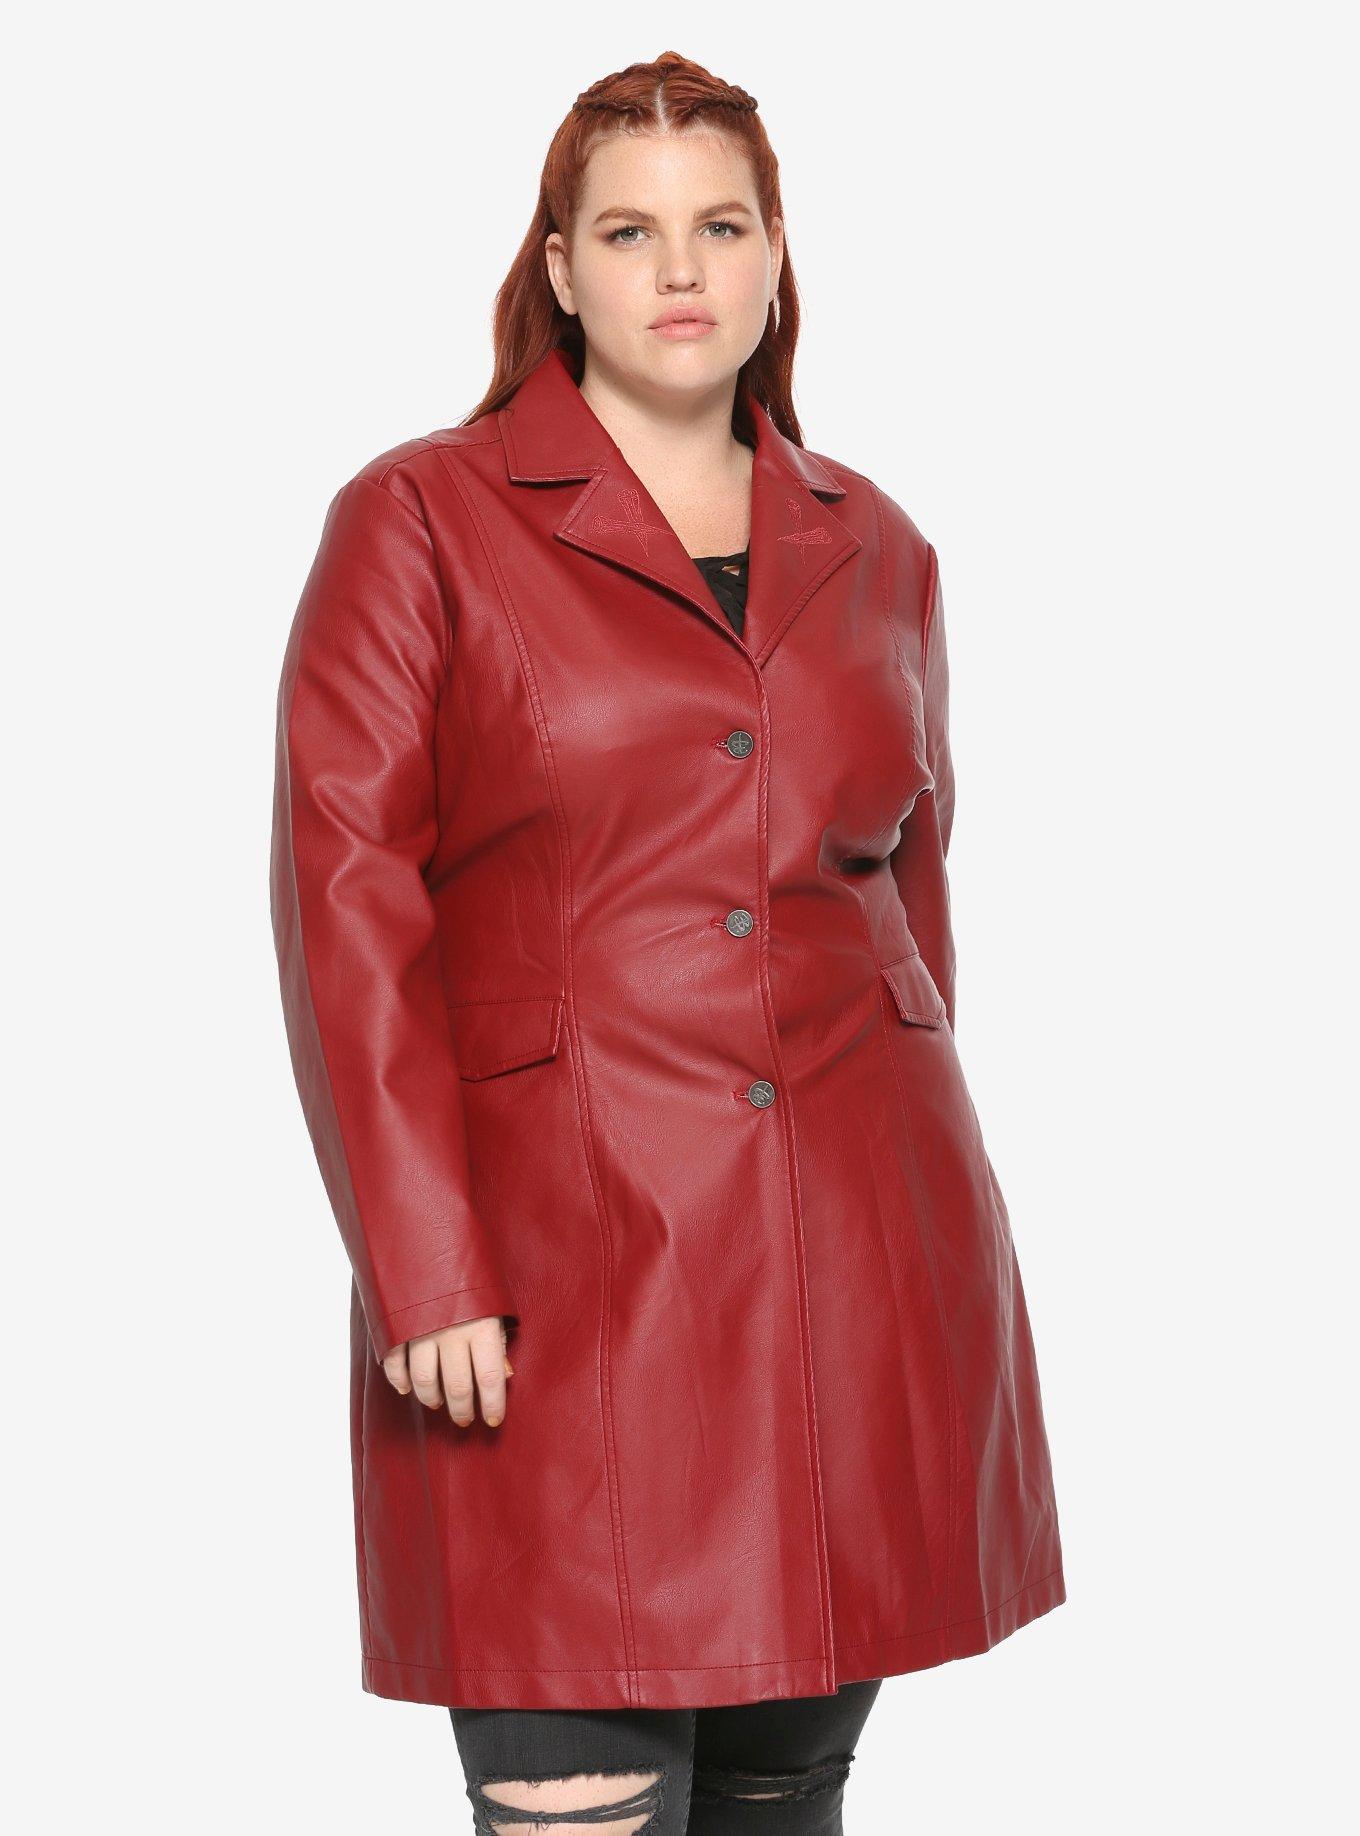 Buffy The Vampire Slayer Girls Trench Coat Plus Size, RED, hi-res